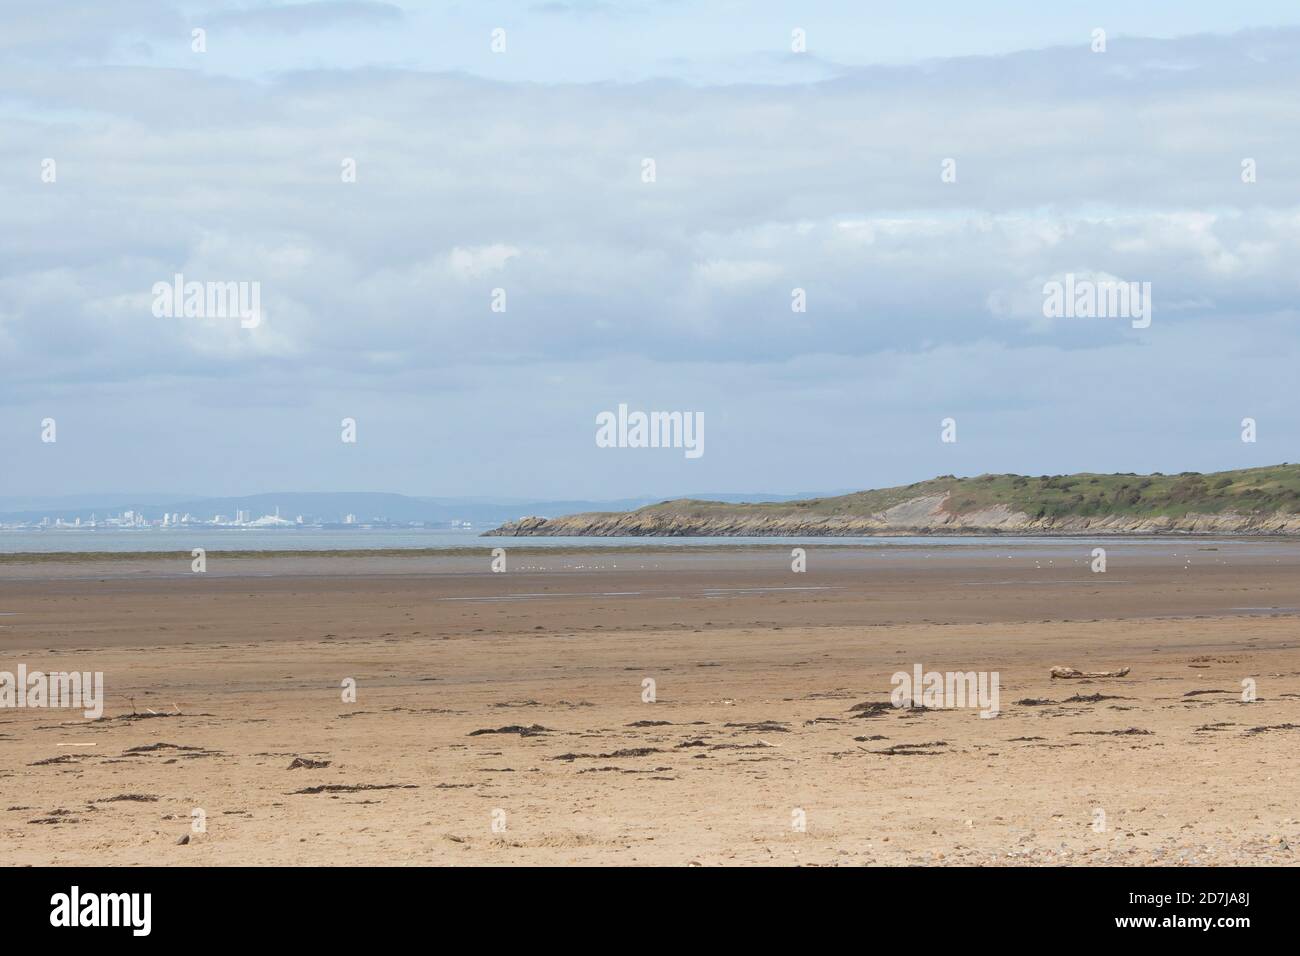 View from Sand Bay, Kewstoke, Somerset, United Kingdom looking towards Wales including Cardiff Stock Photo